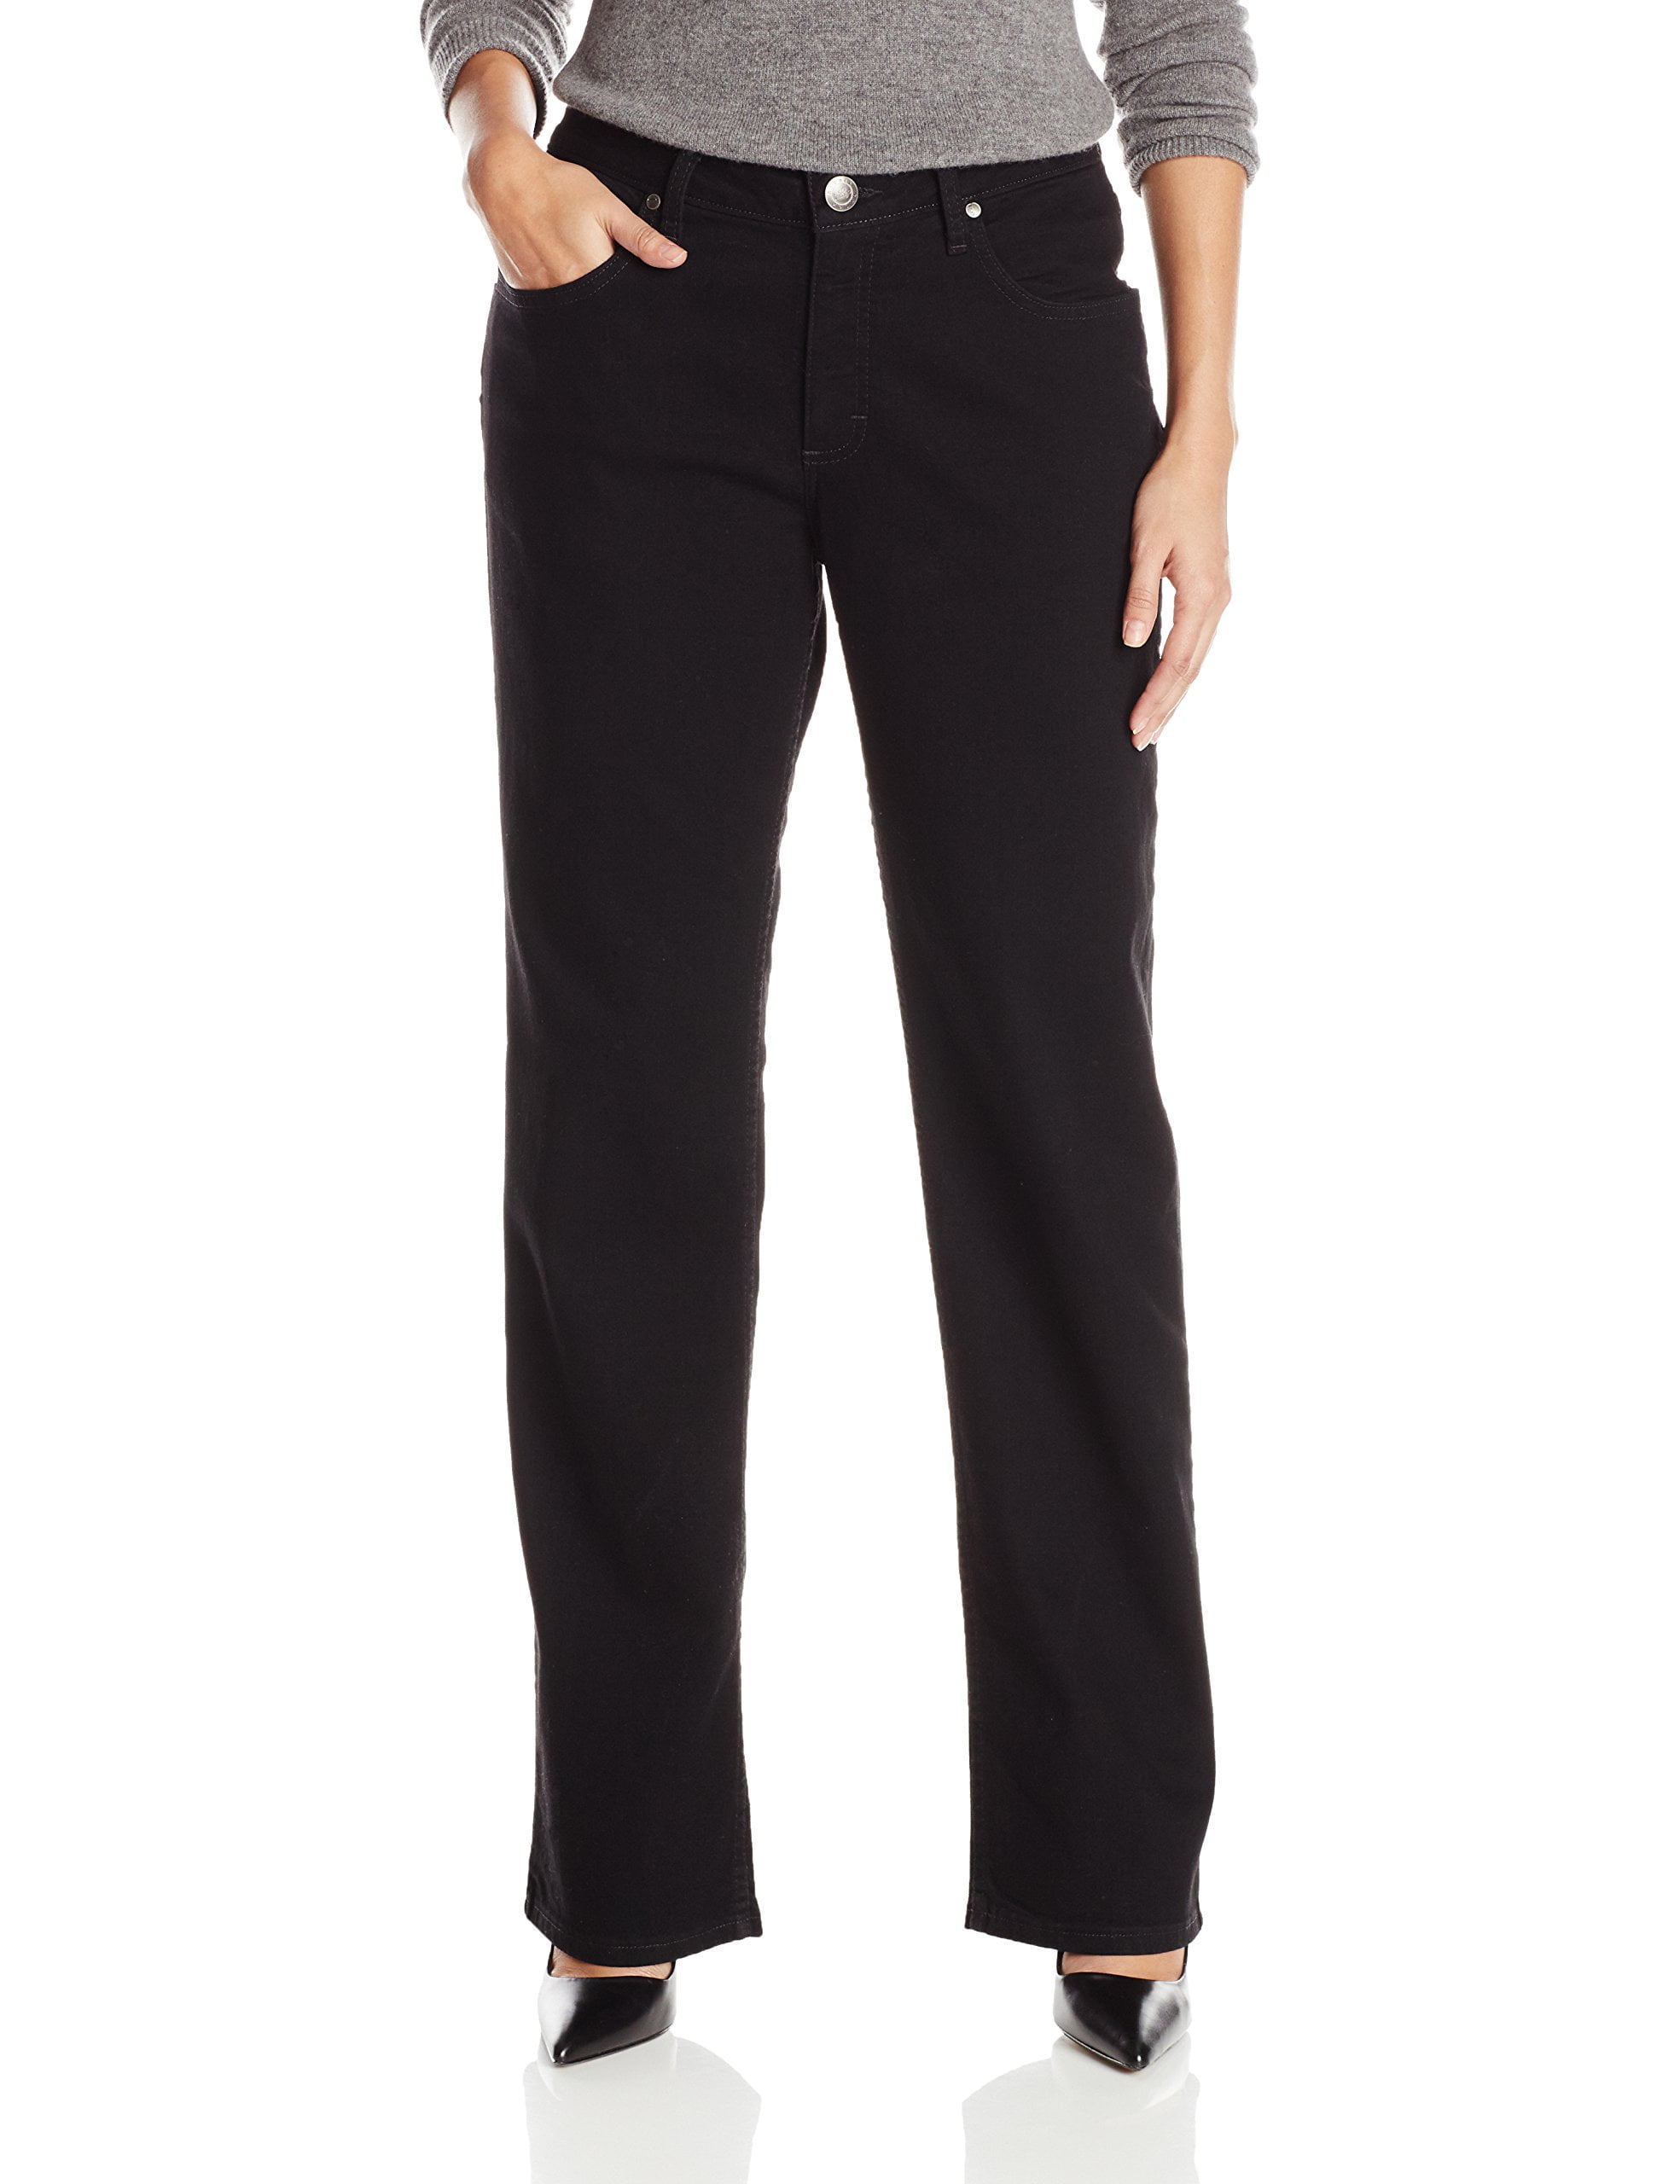 Womens Relaxed-Fit Stretch Jeans 14 - Walmart.com